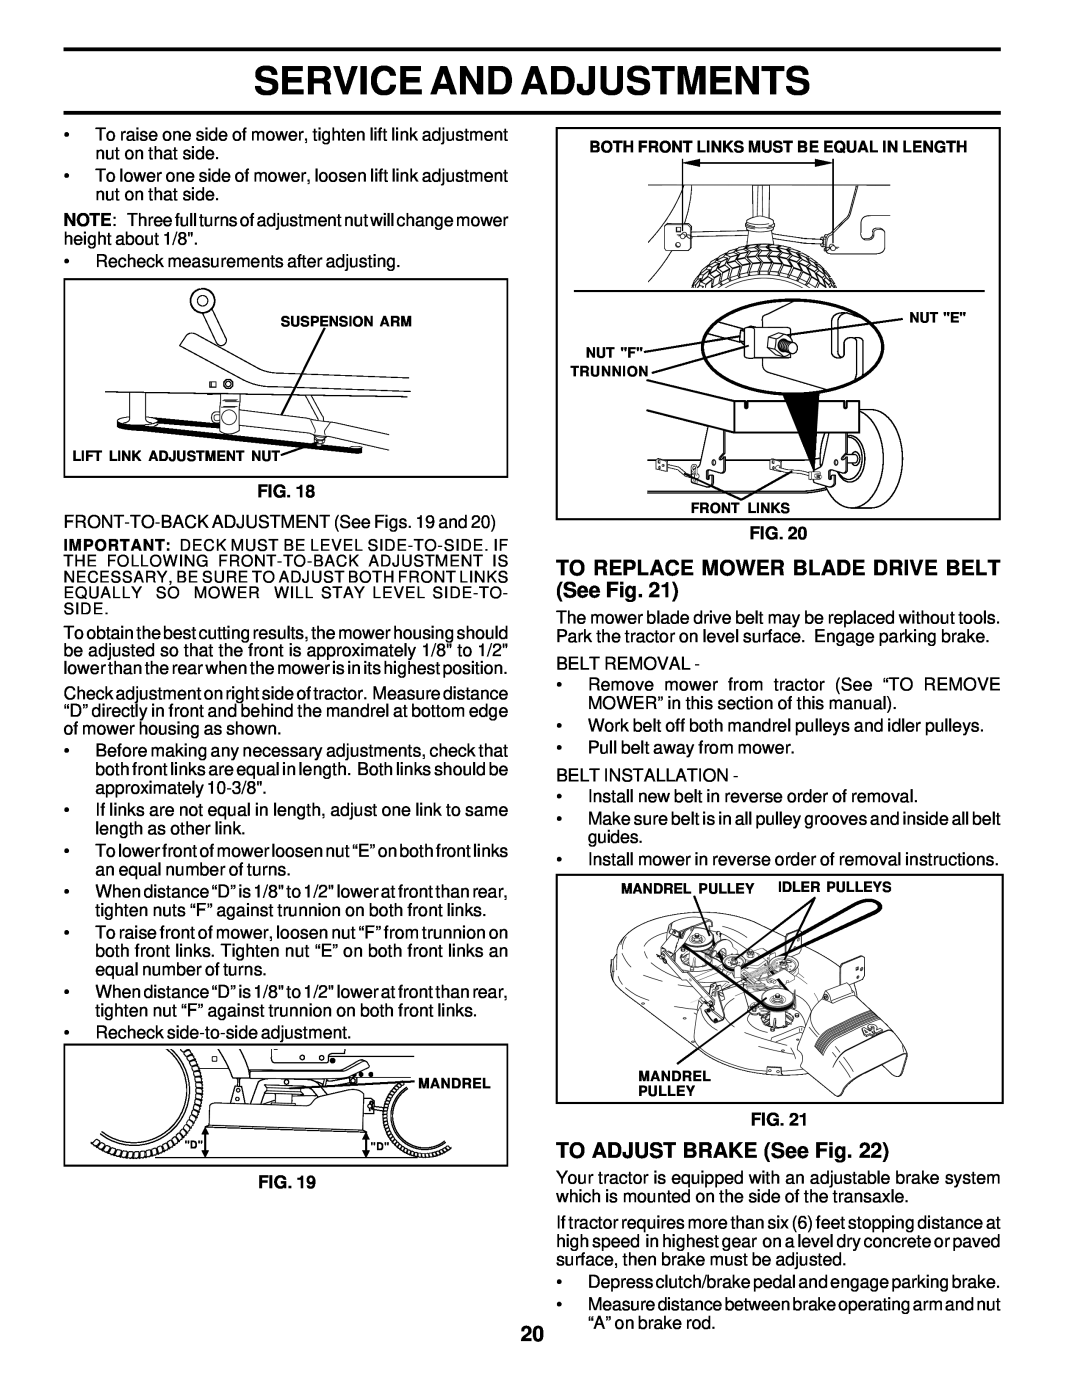 Weed Eater 177019 manual TO REPLACE MOWER BLADE DRIVE BELT See Fig, TO ADJUST BRAKE See Fig, Service And Adjustments 